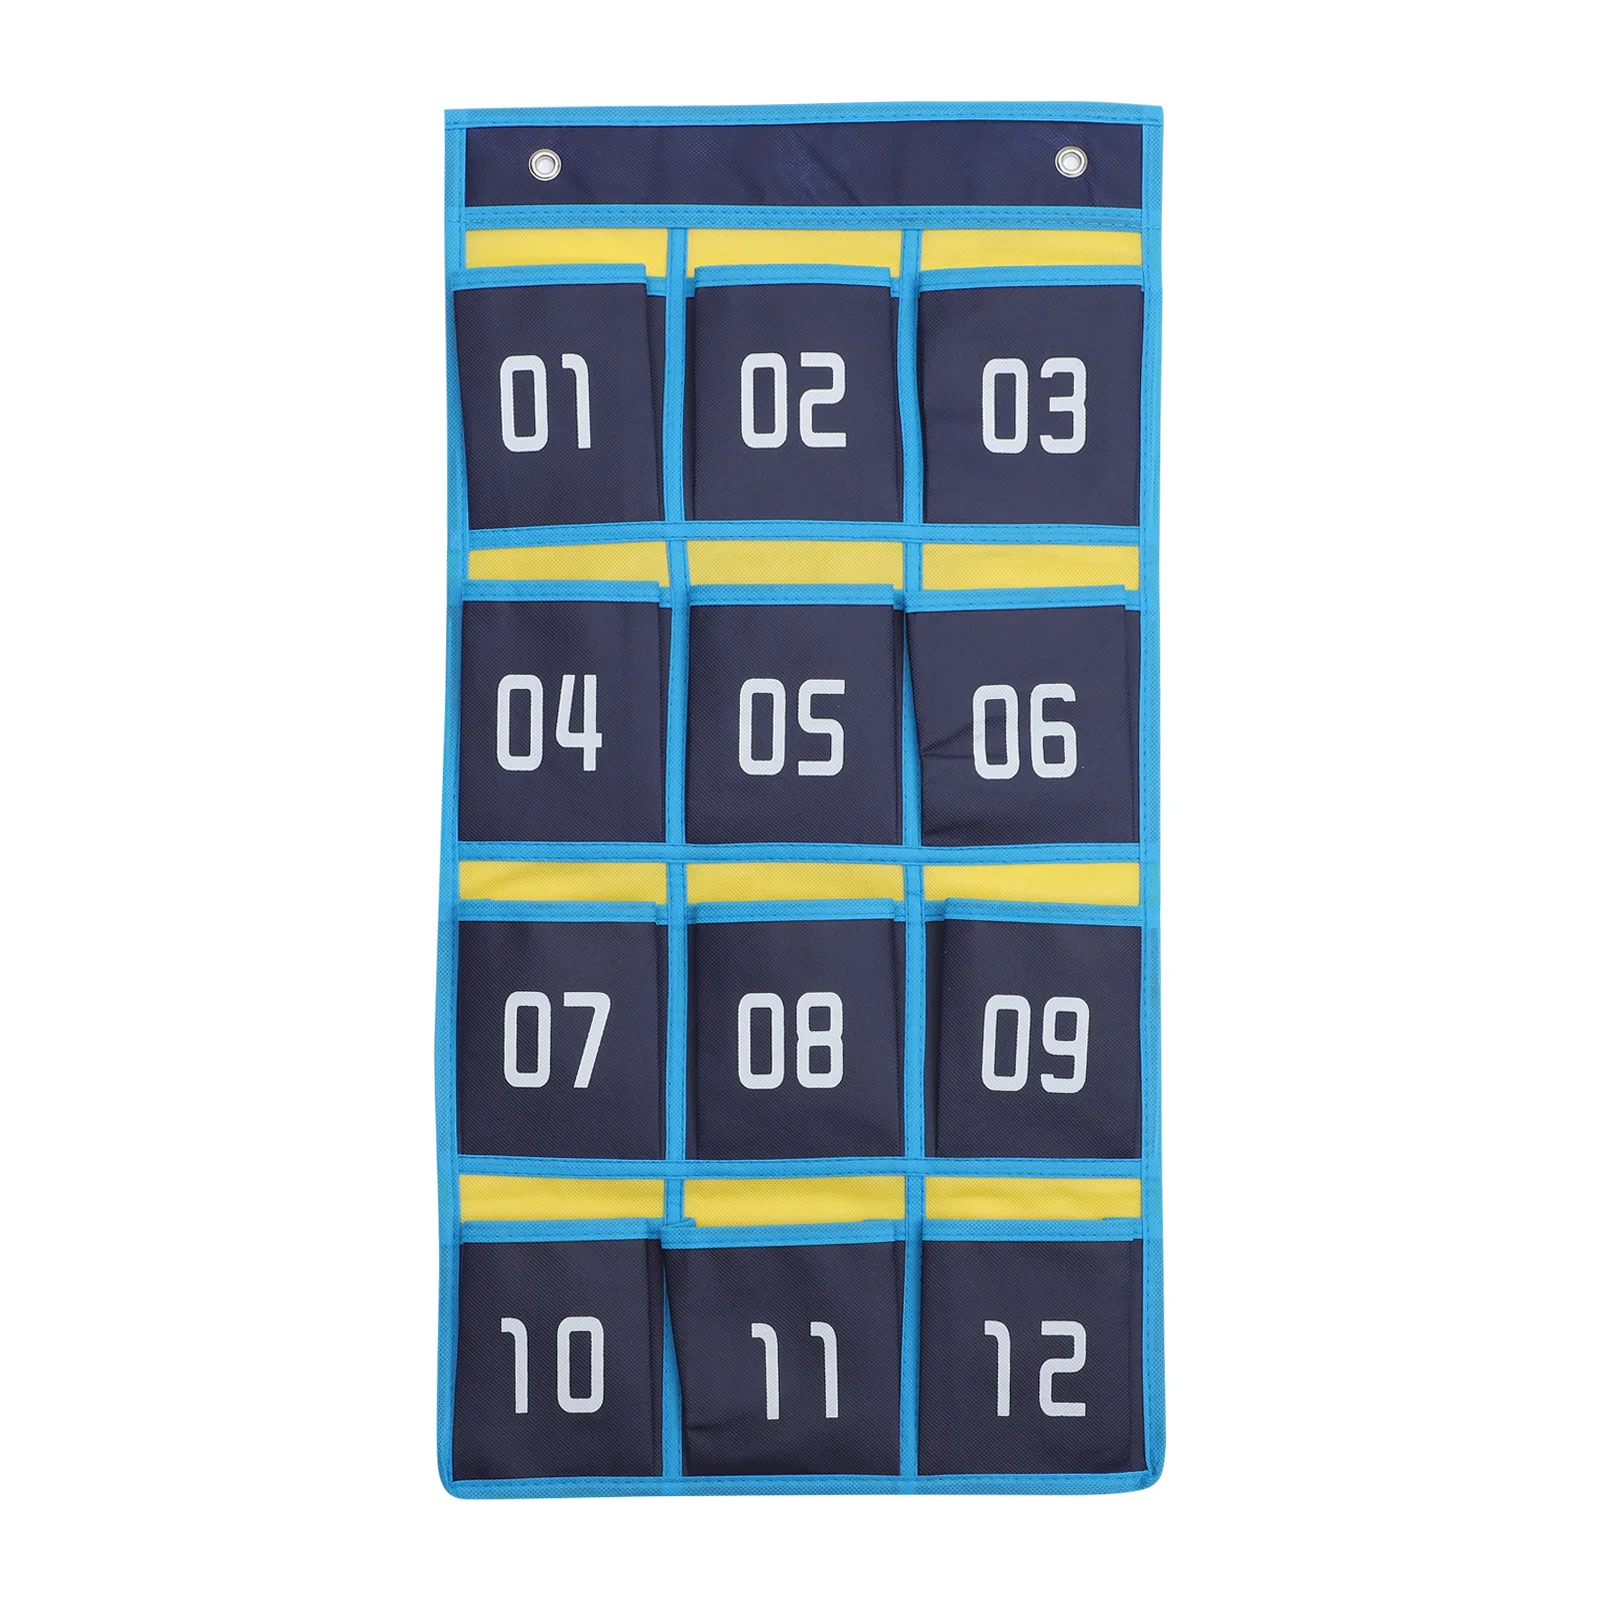 

12 Pocket Clothes Closet Organizer Mobile Phone Storage Bag Calculator Holder Non-woven Cell Phones Stand Hanging Chart Student